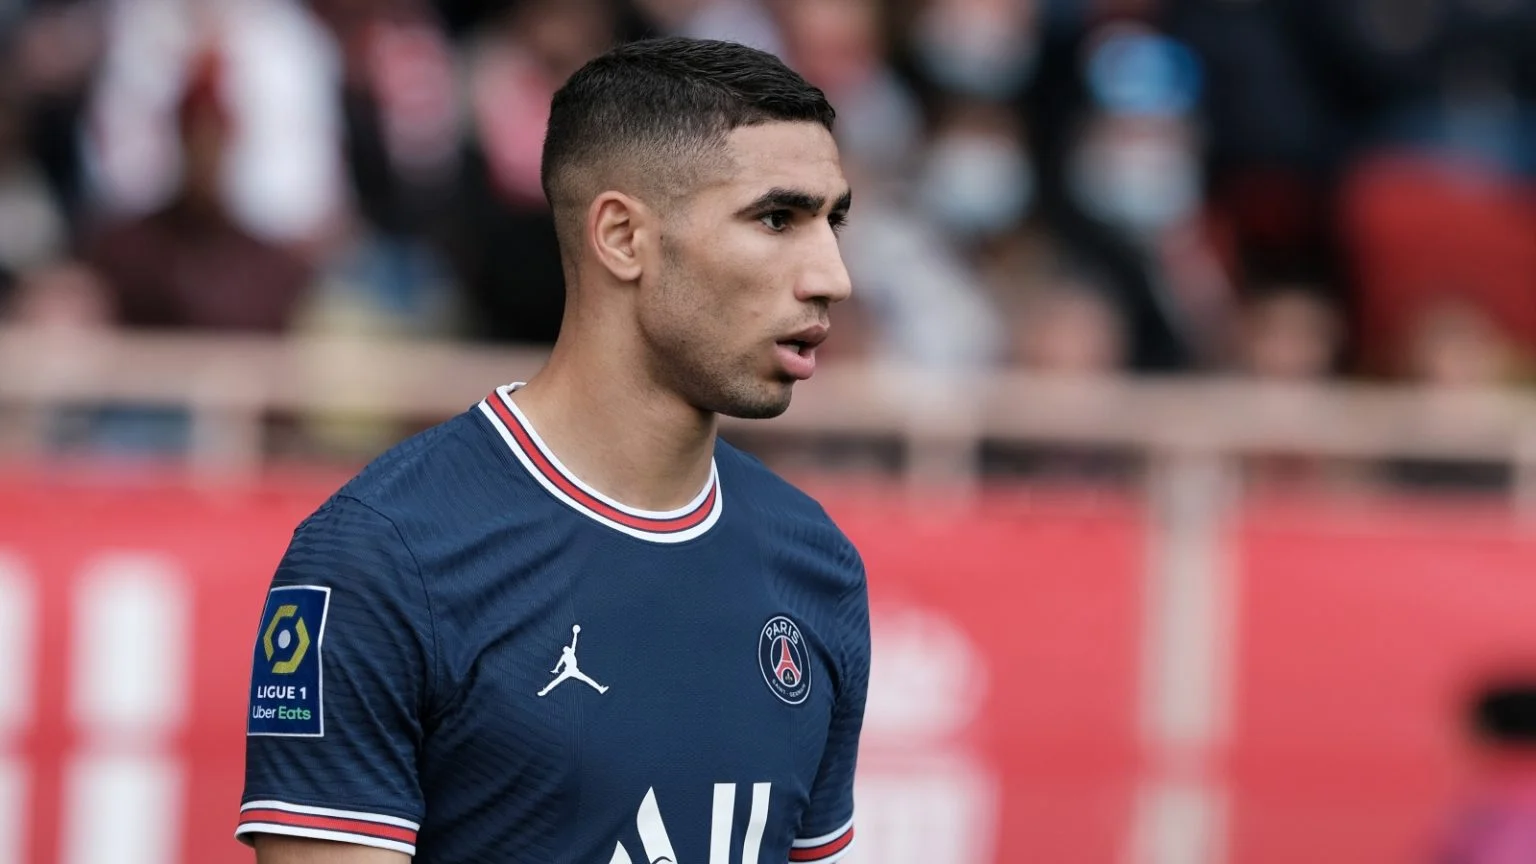 2023 Ballon d’Or: Hakimi names player who deserve to win ahead of Messi, Haaland